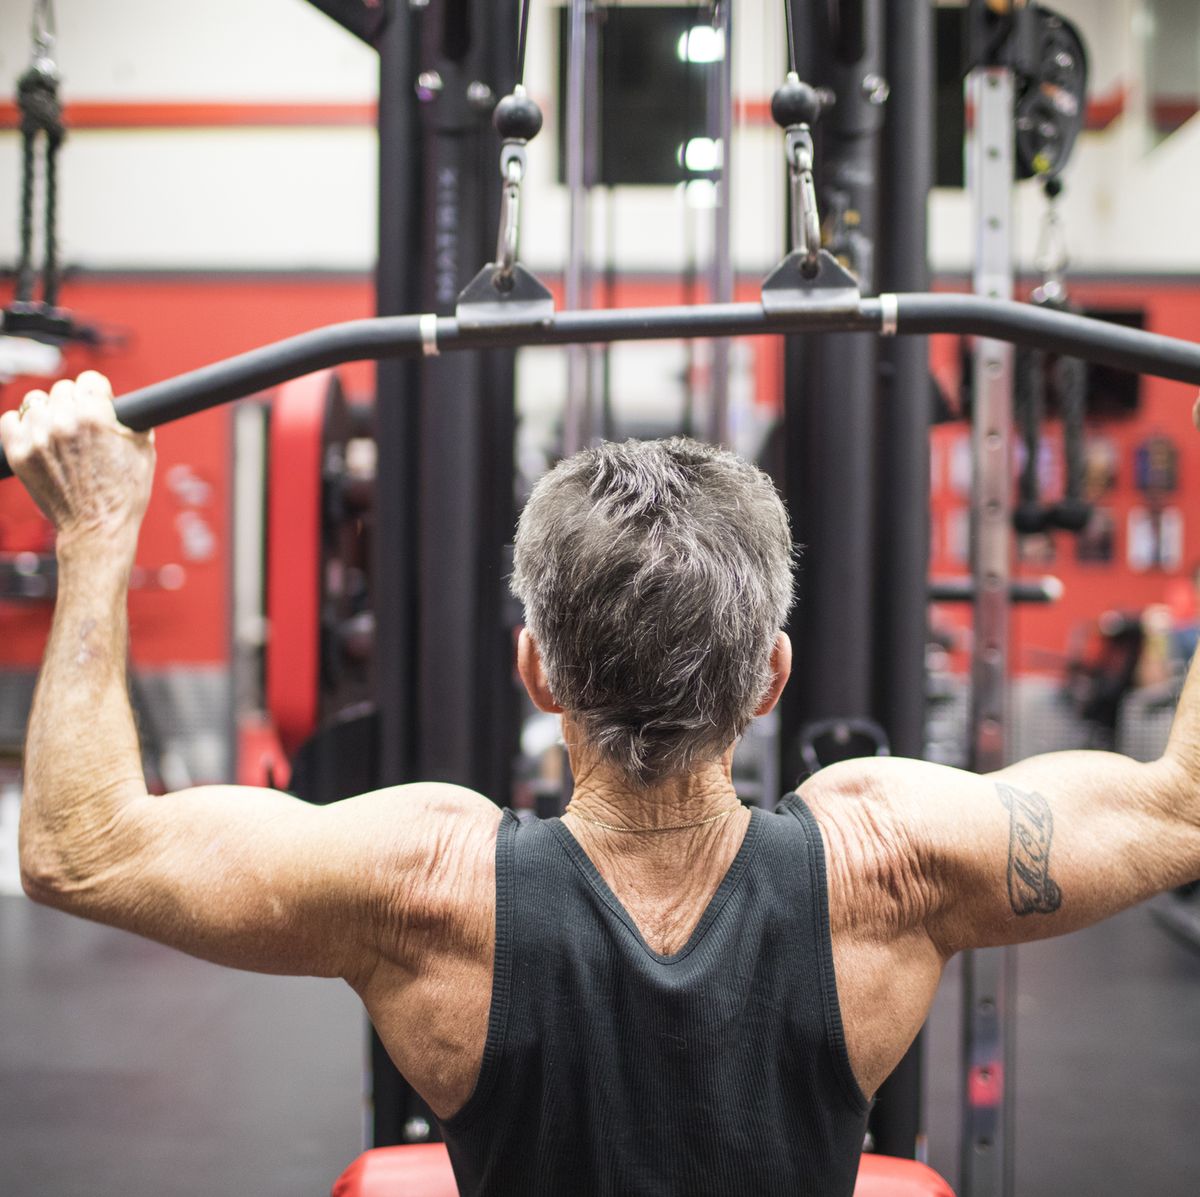 The 7 Best Lat Pulldown Bars for Your Back Workouts and Home Gym